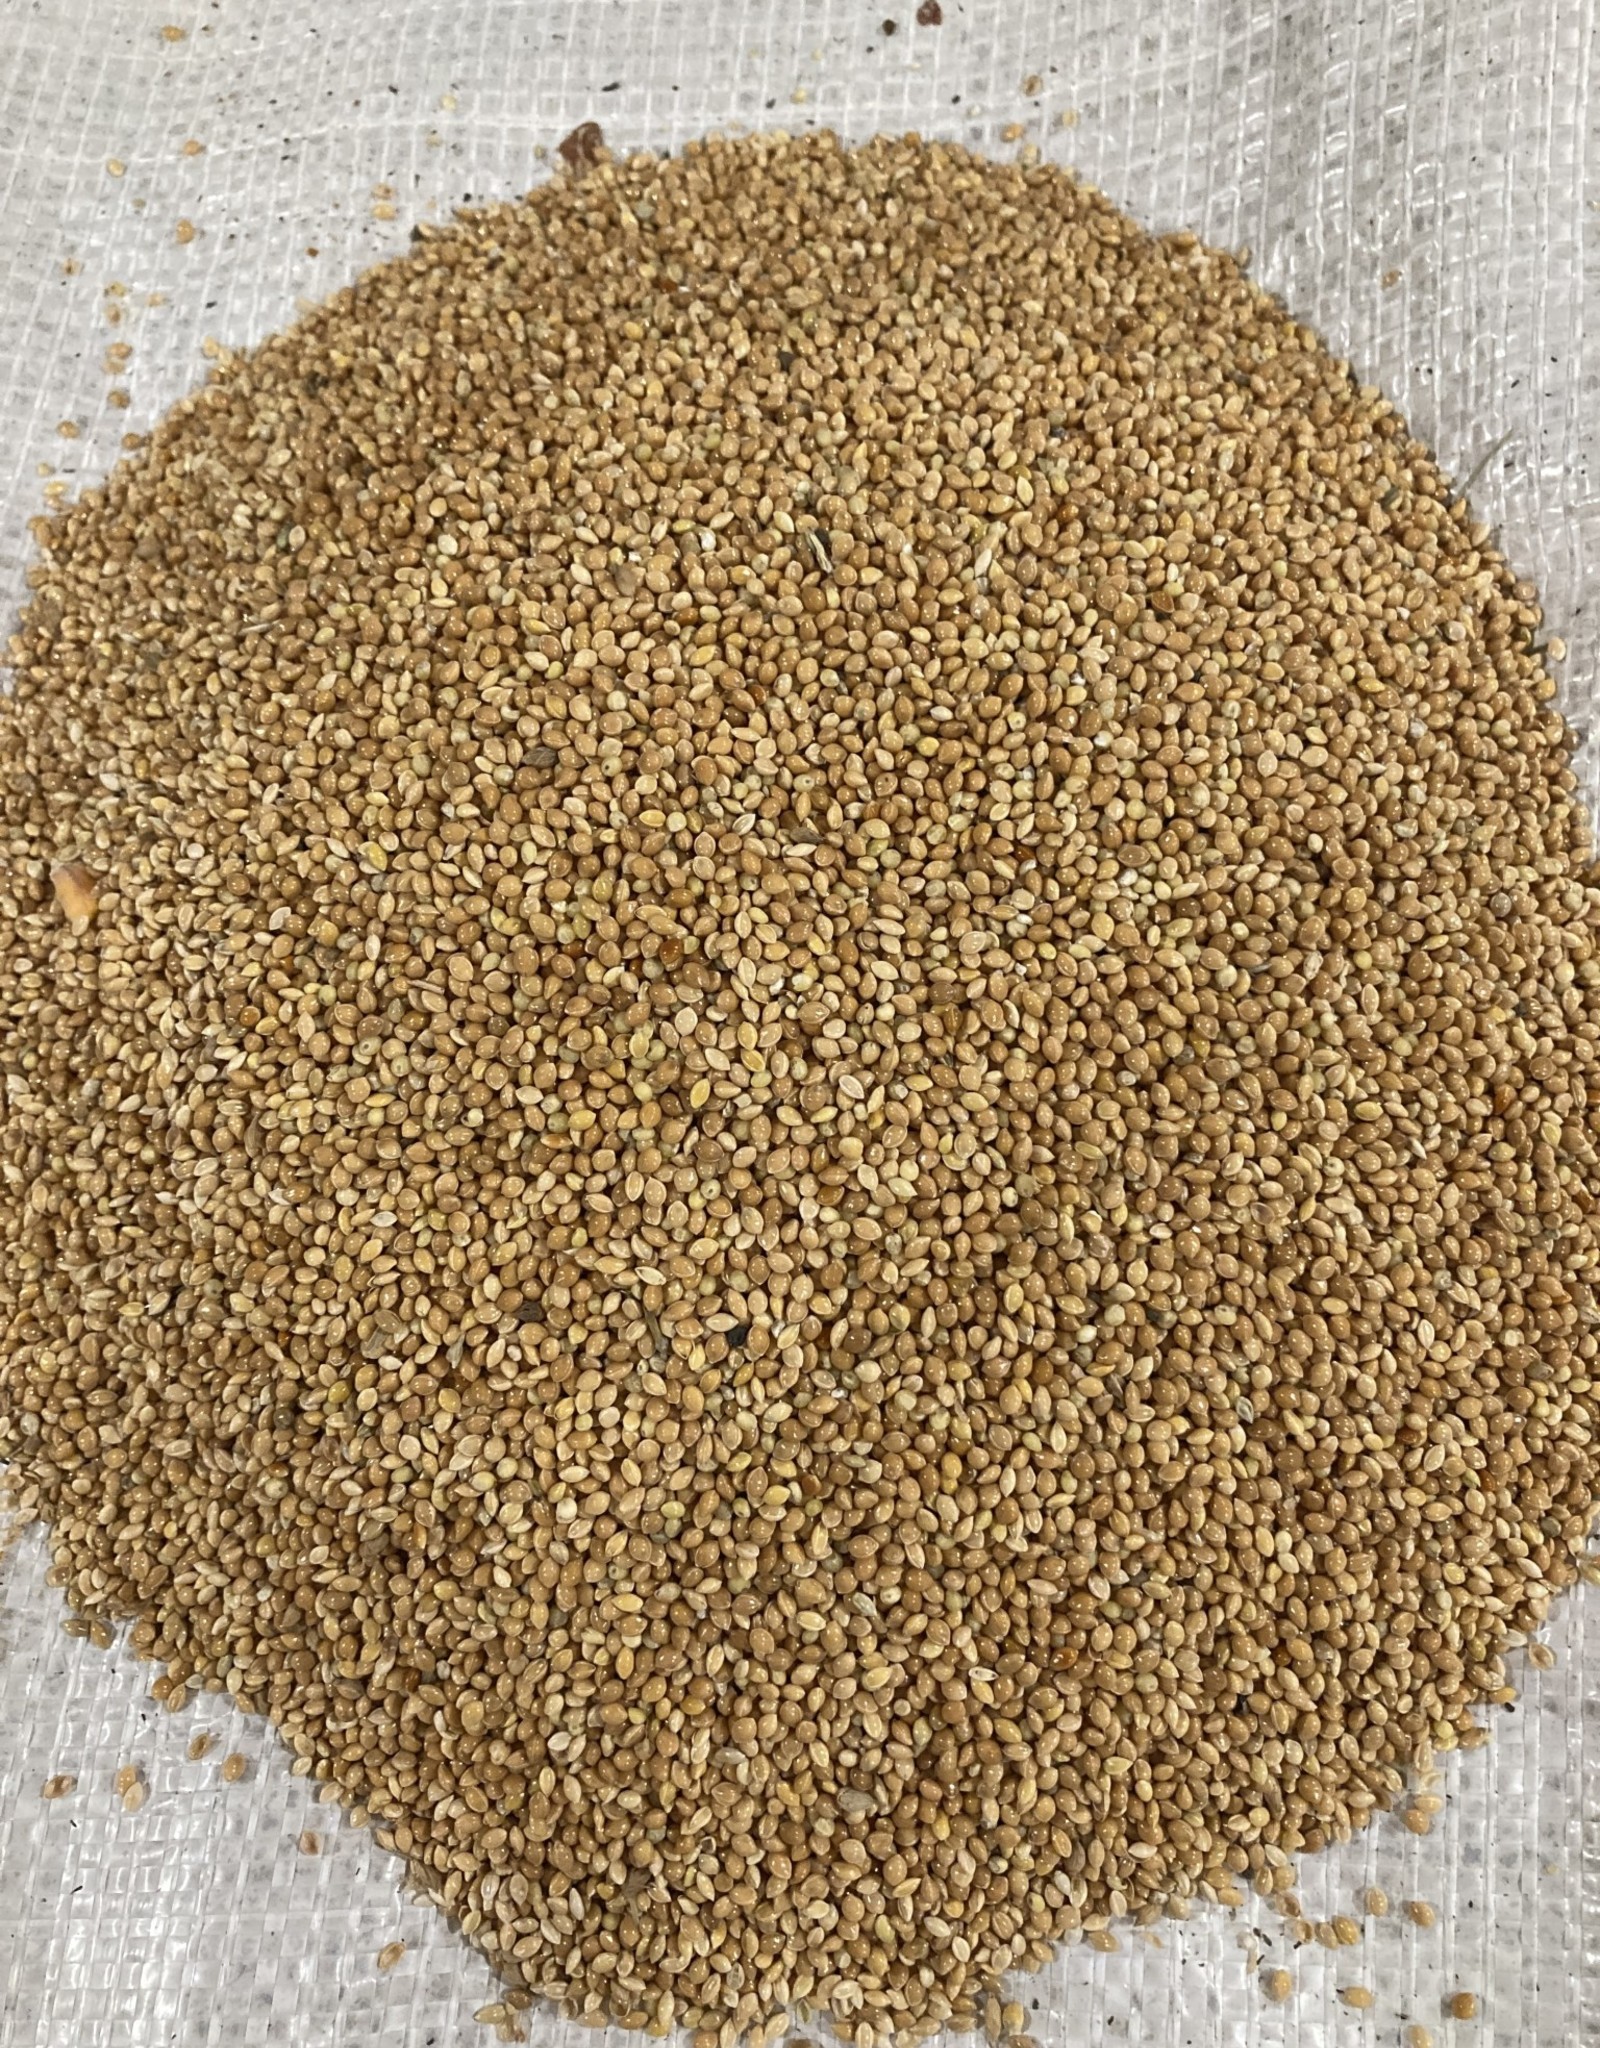 Mill Creek/Seed WMILLET12 12lb bag of white/yellow millet